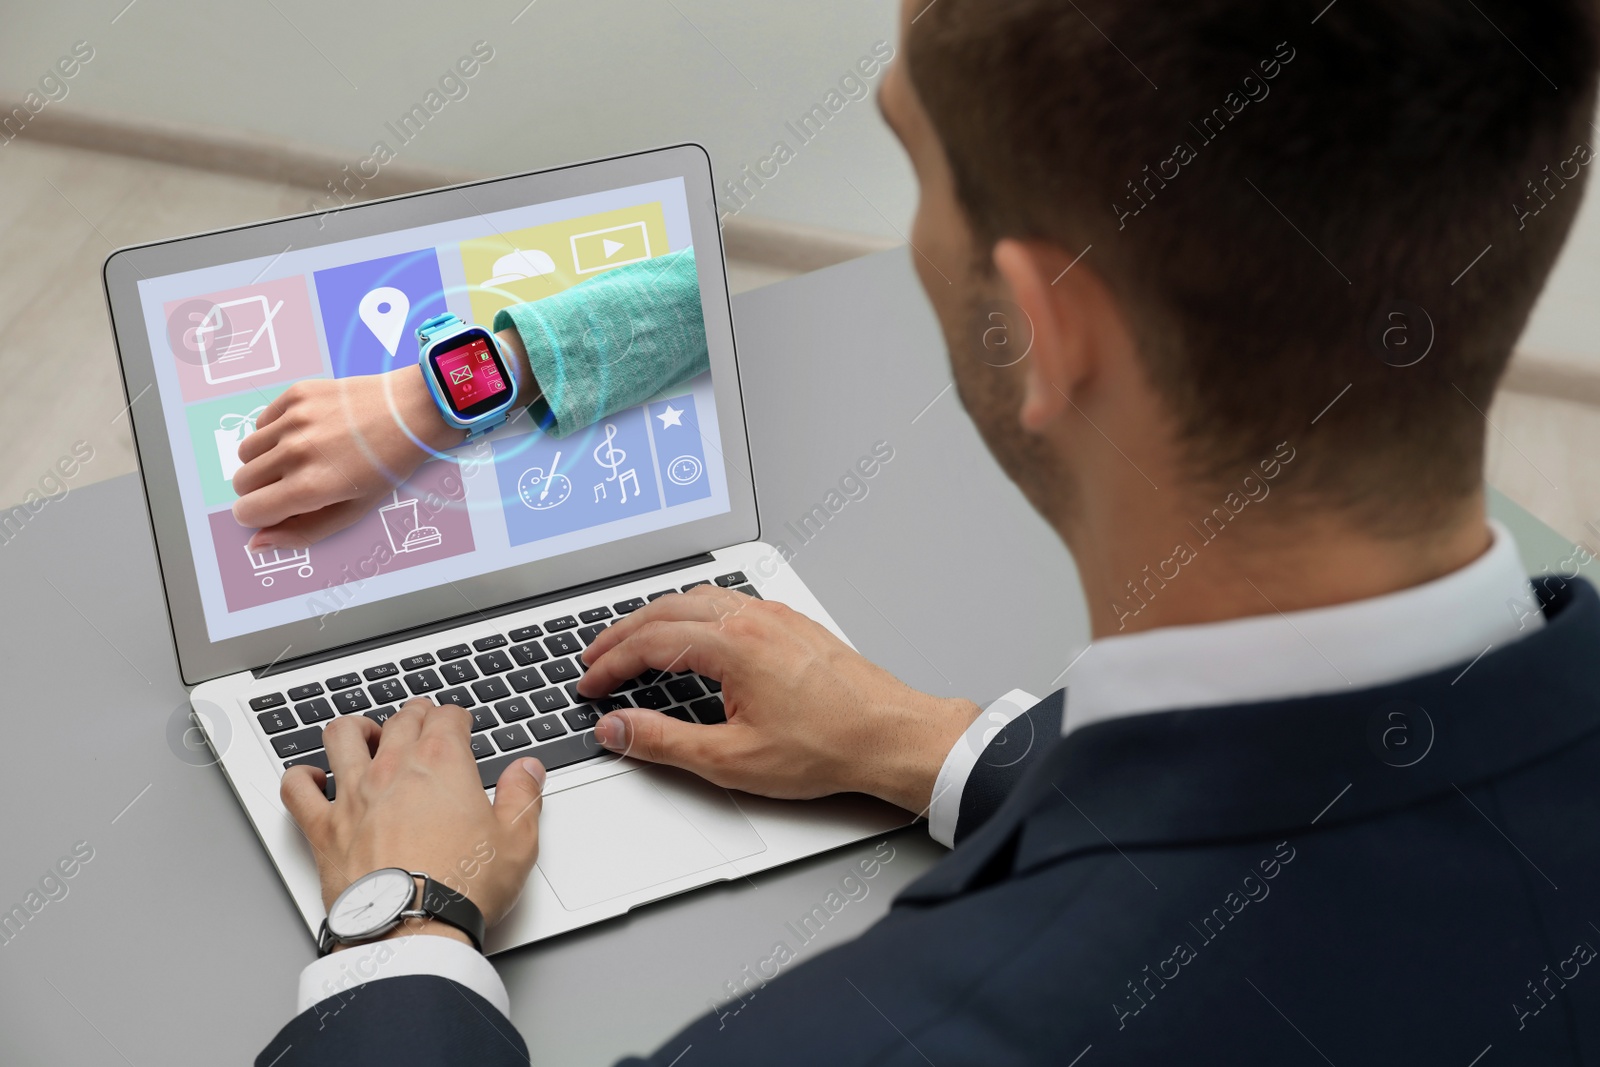 Image of Control kid's geolocation via smart watch. Man using laptop at table, closeup